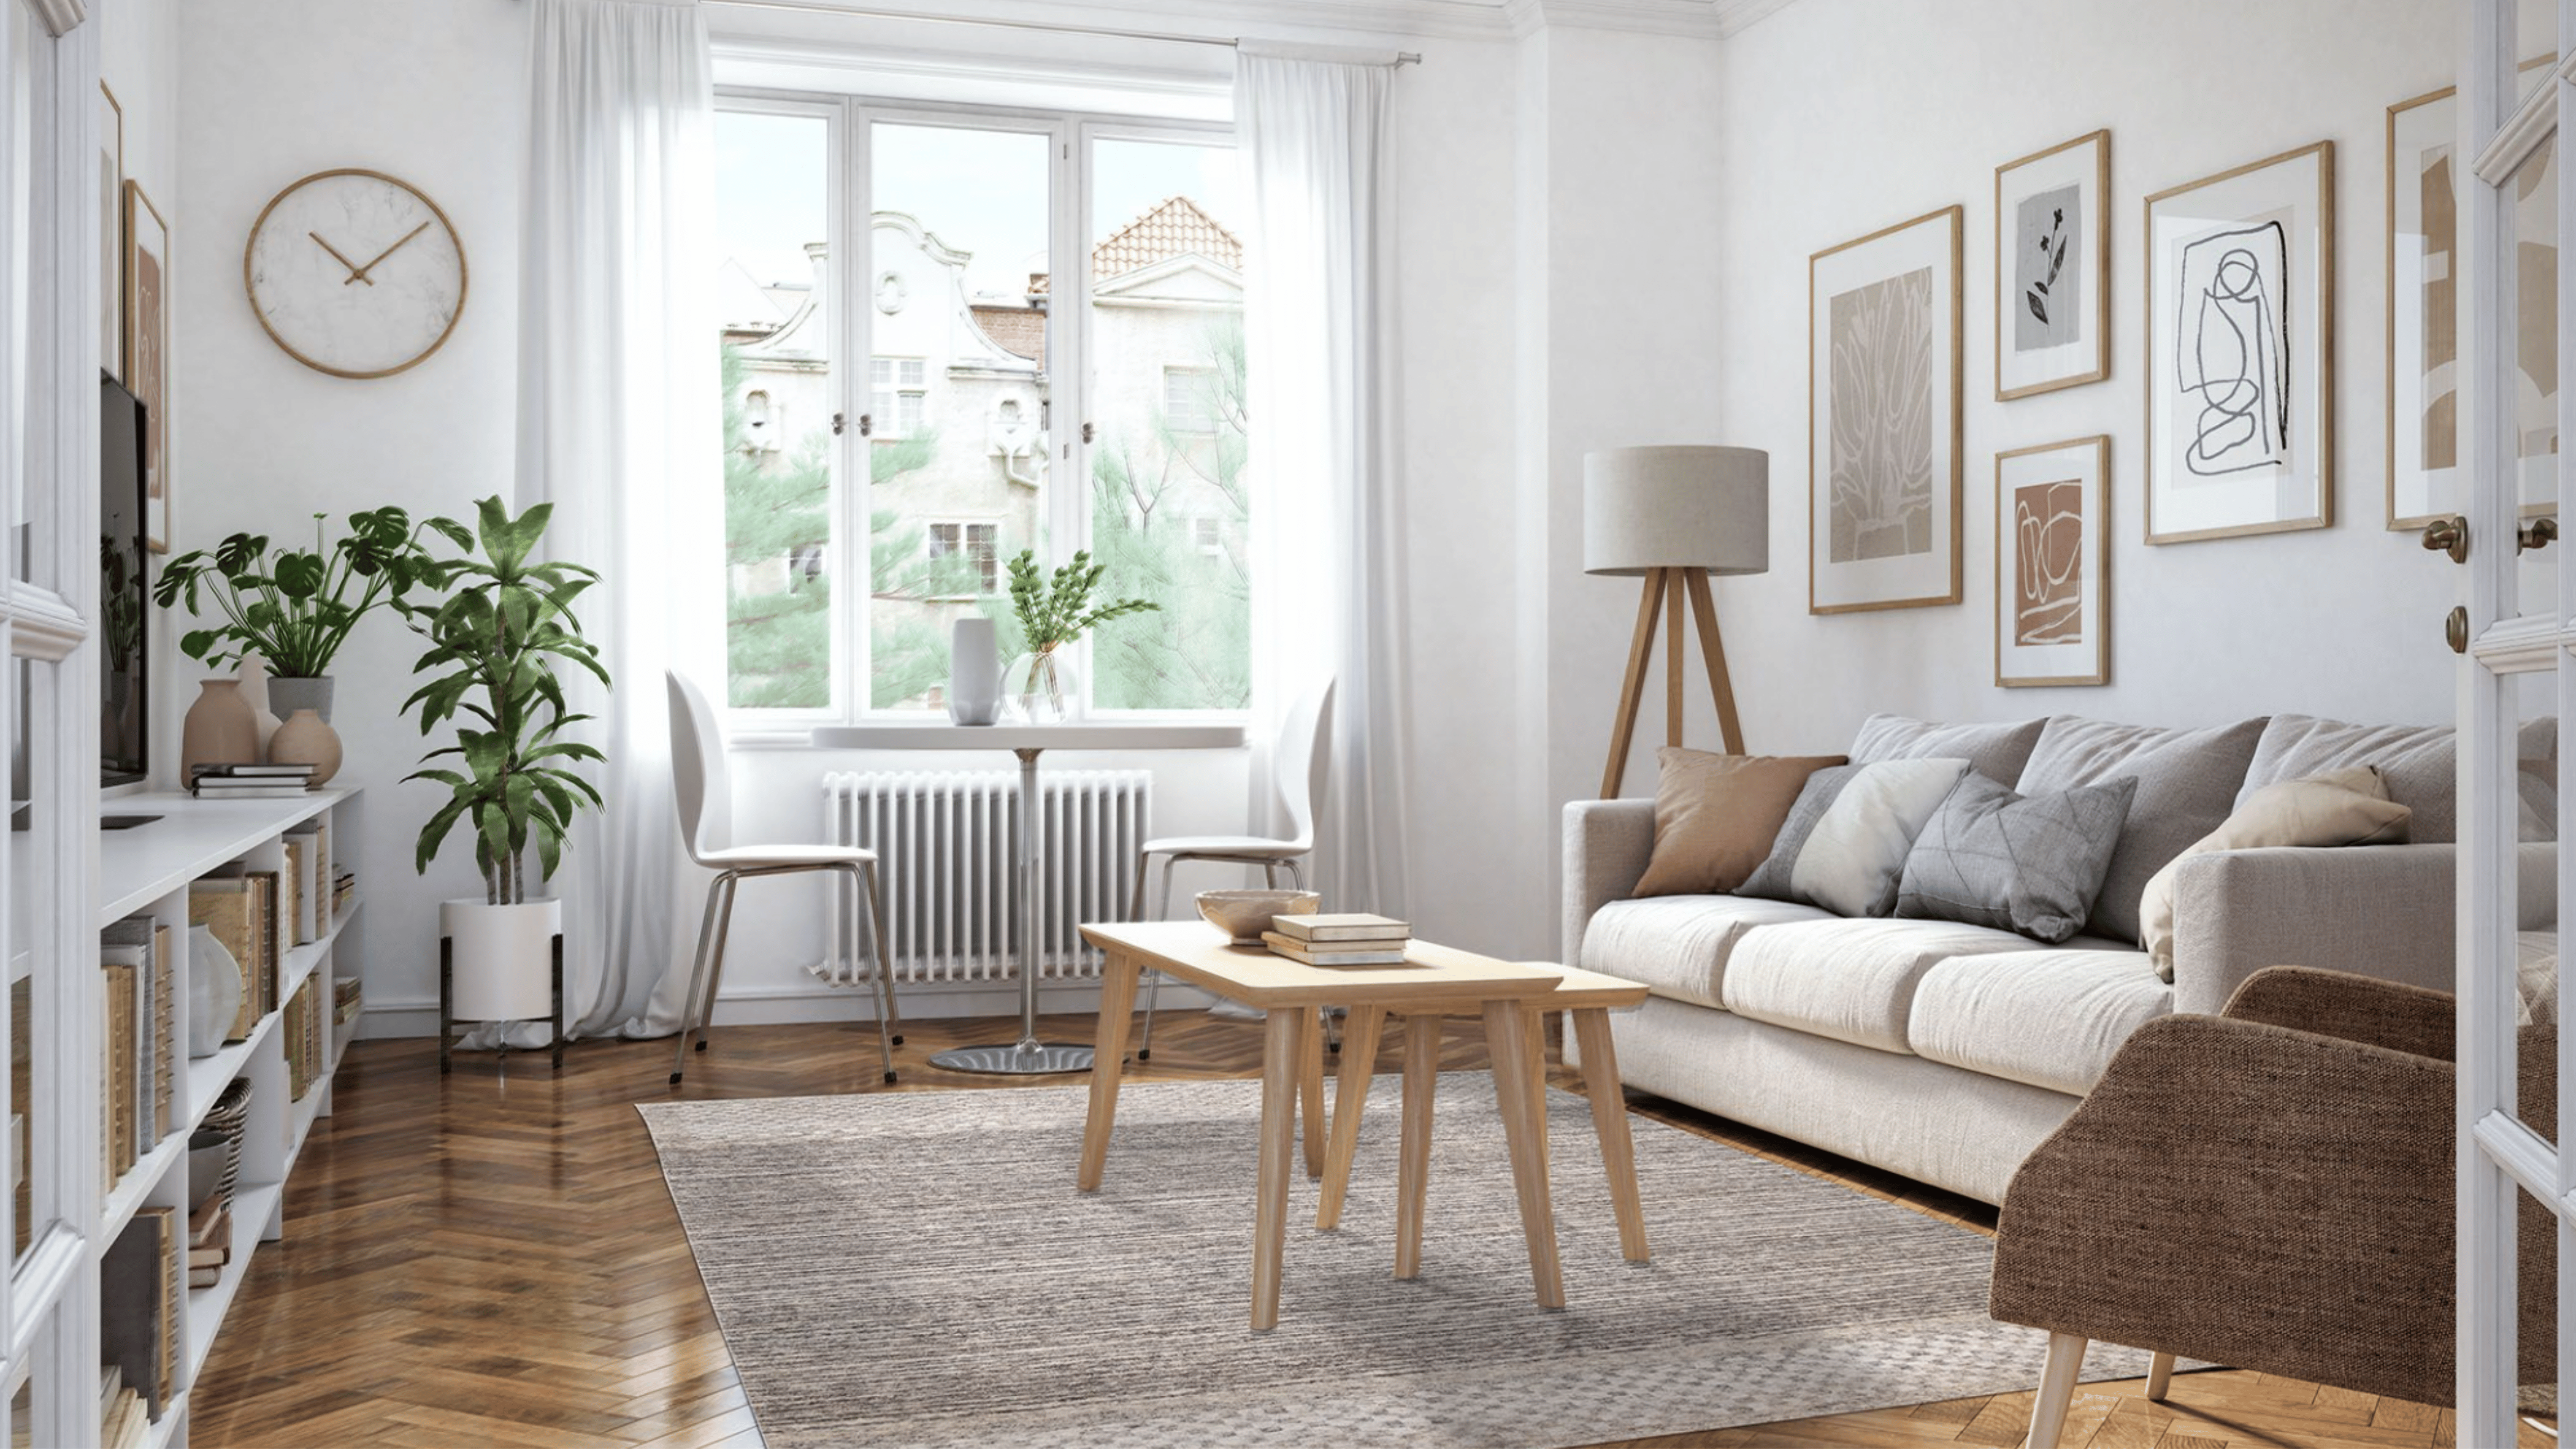 How to Pick the Proper Size Rug for Your Room